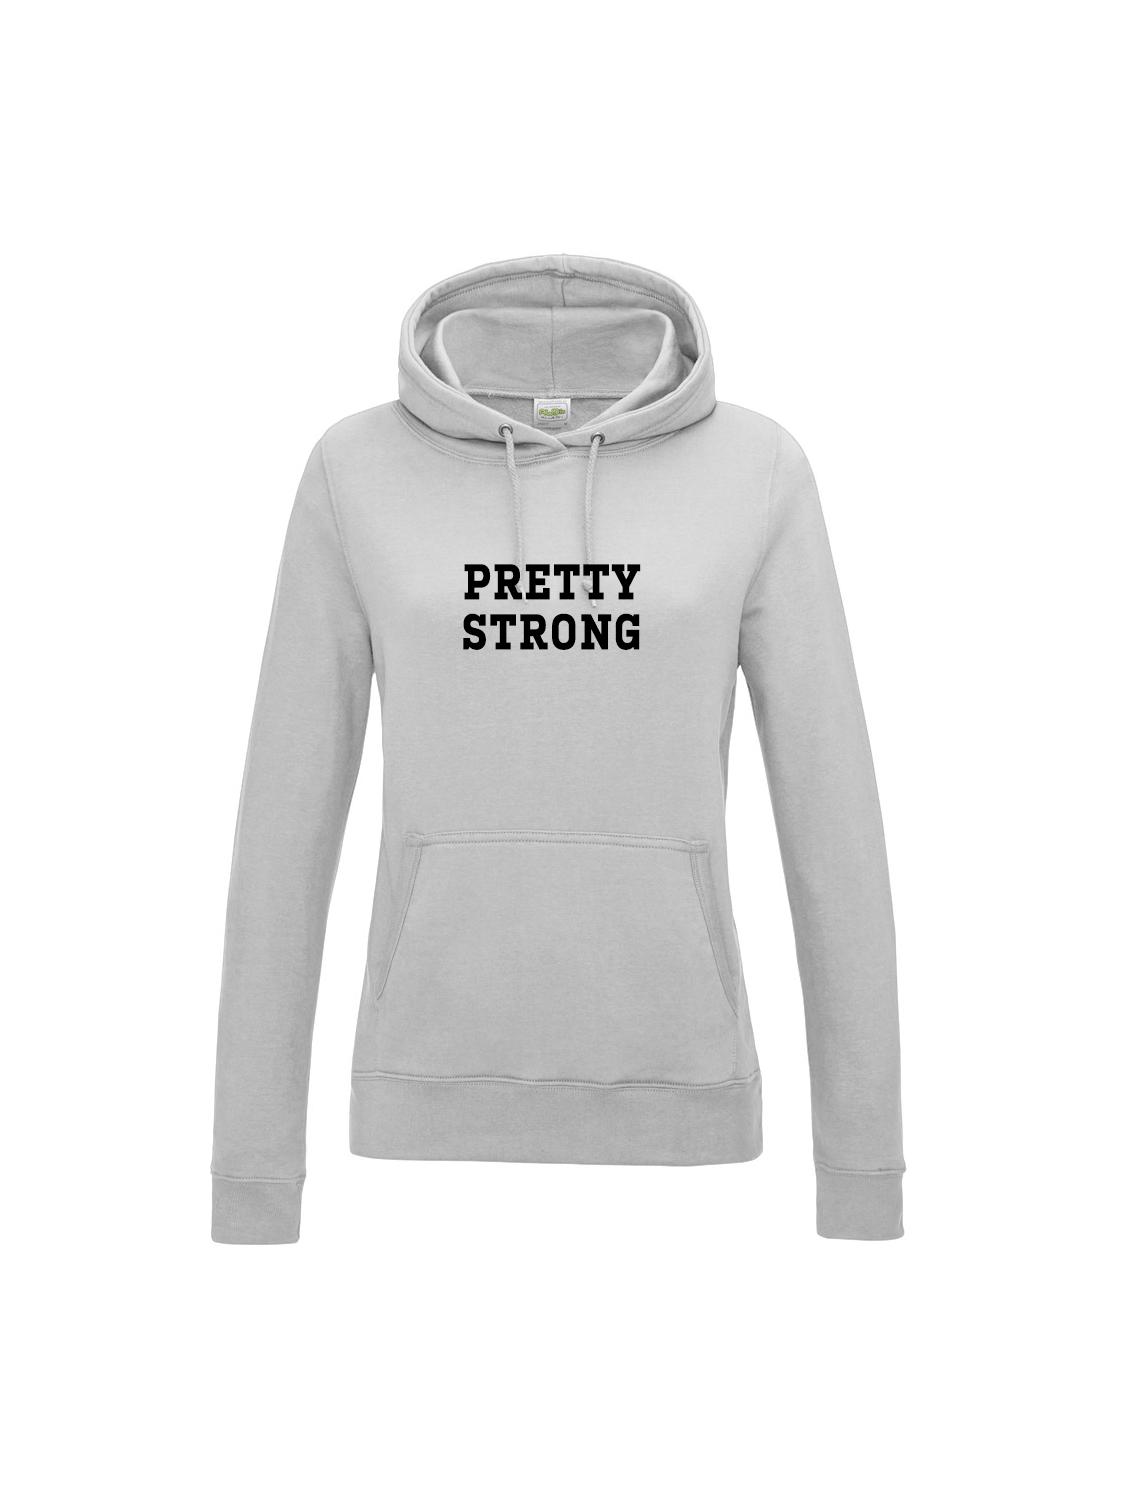 PRETTY STRONG hoodie